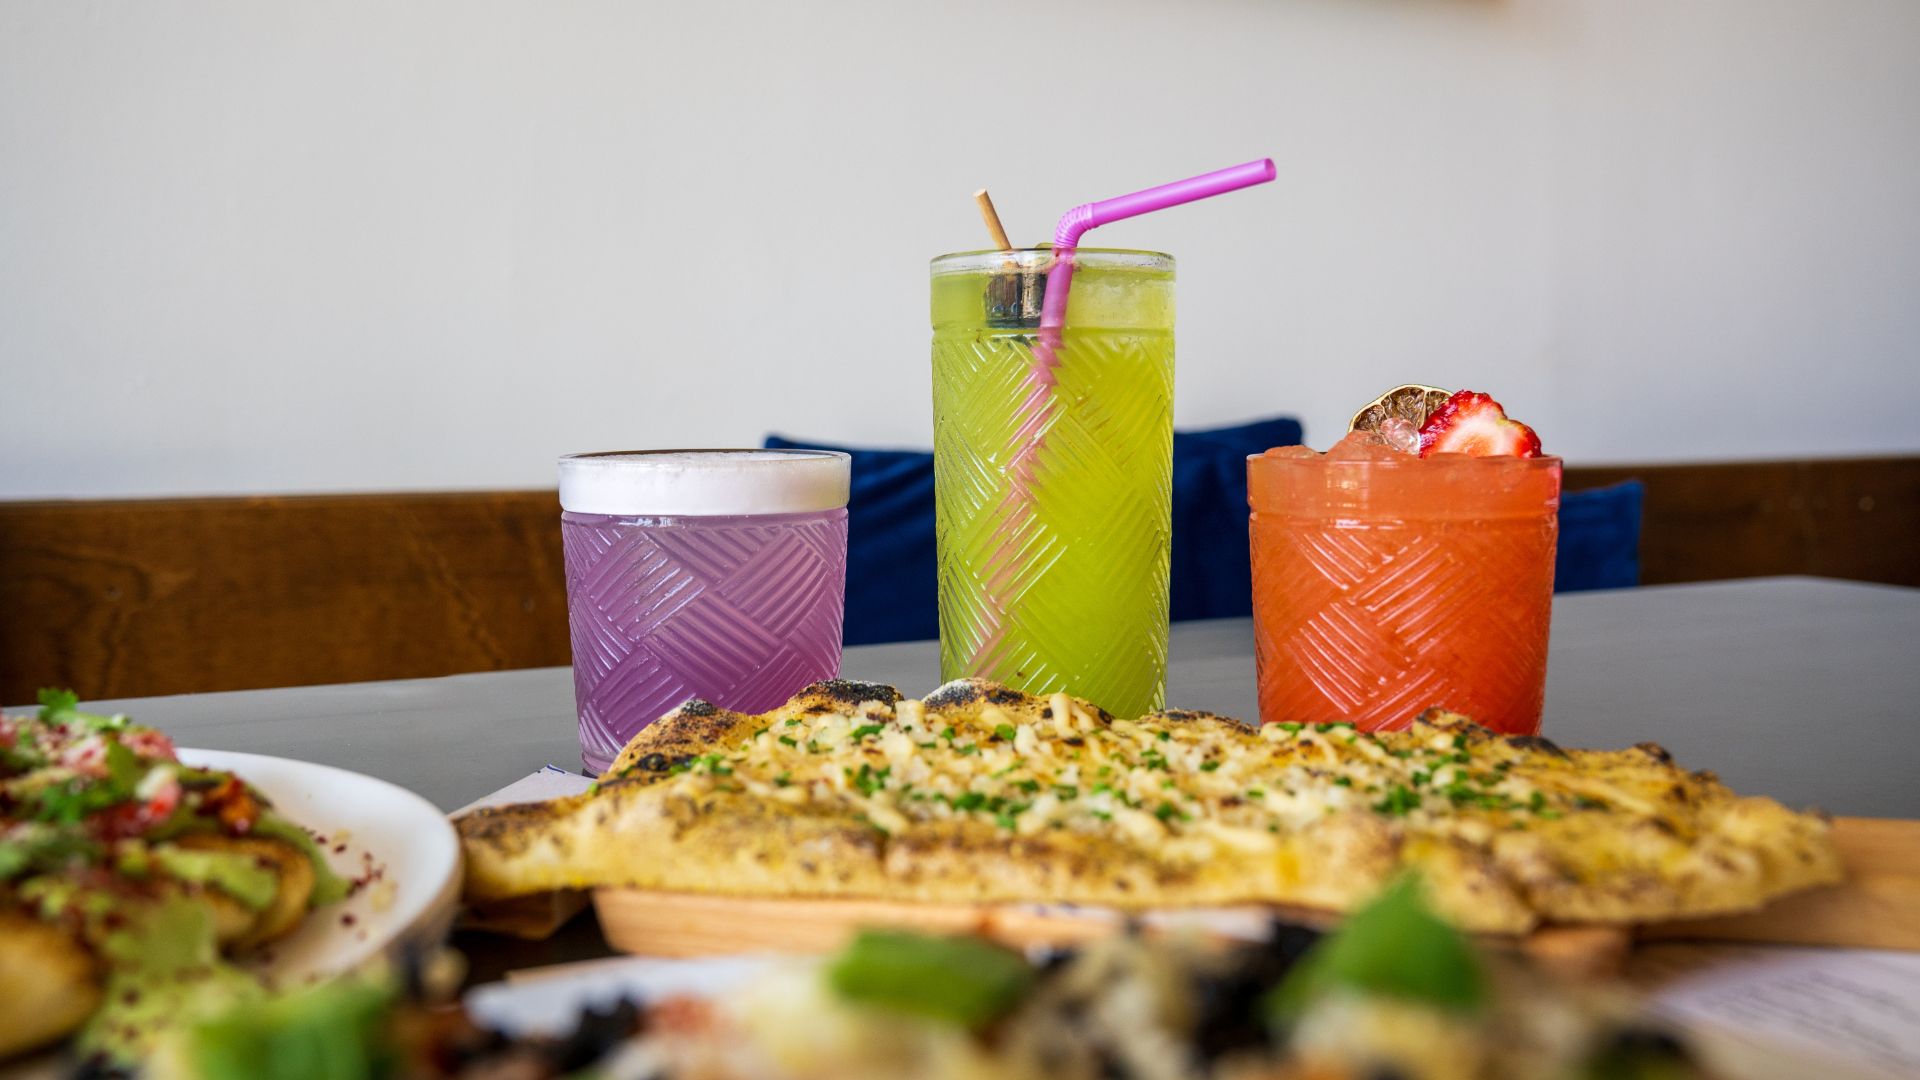 Press features batched cocktails and breakfast stuffed pizzas during brunch in St. Louis.